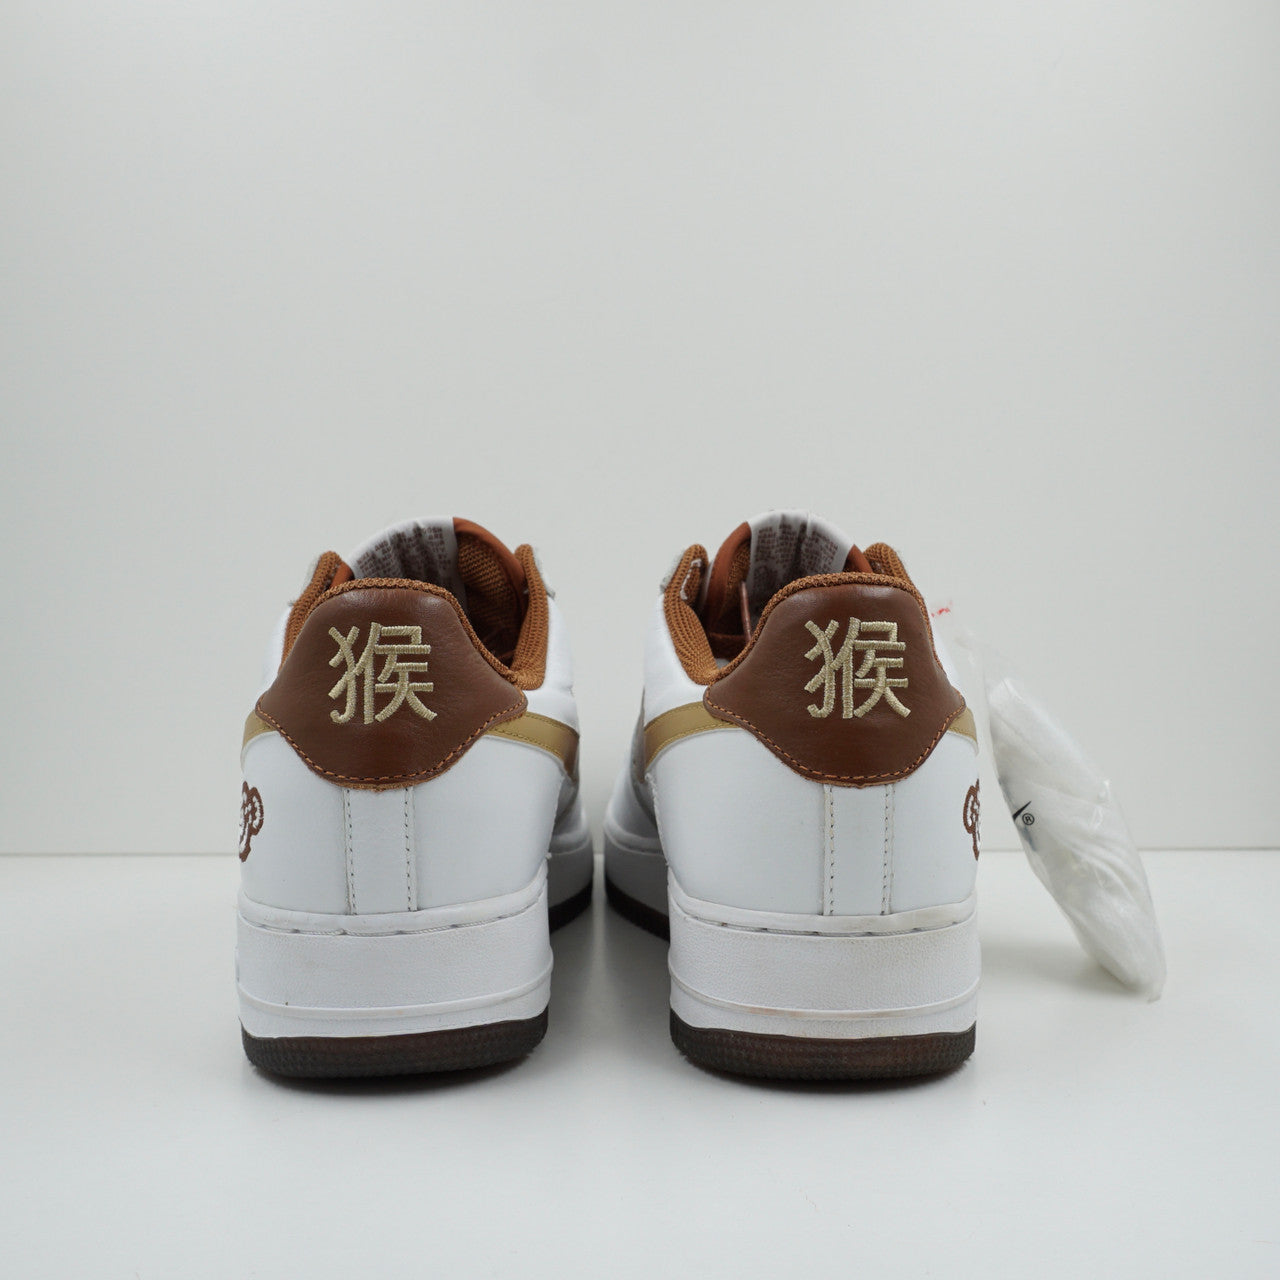 Nike Air Force 1 Year Of The Monkey